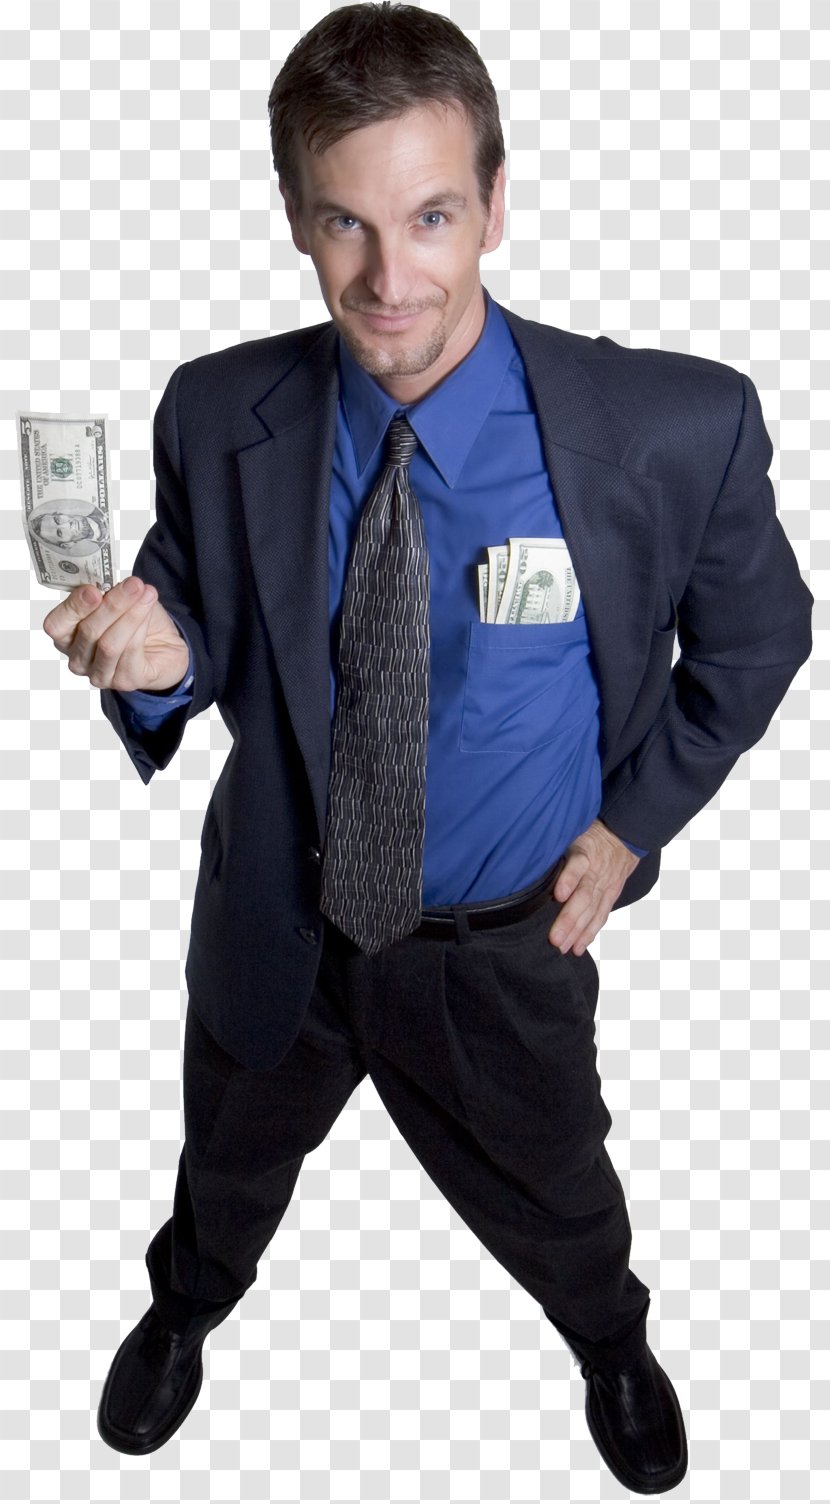 Money - Suit - Foreigner Holding The Dollar Transparent PNG